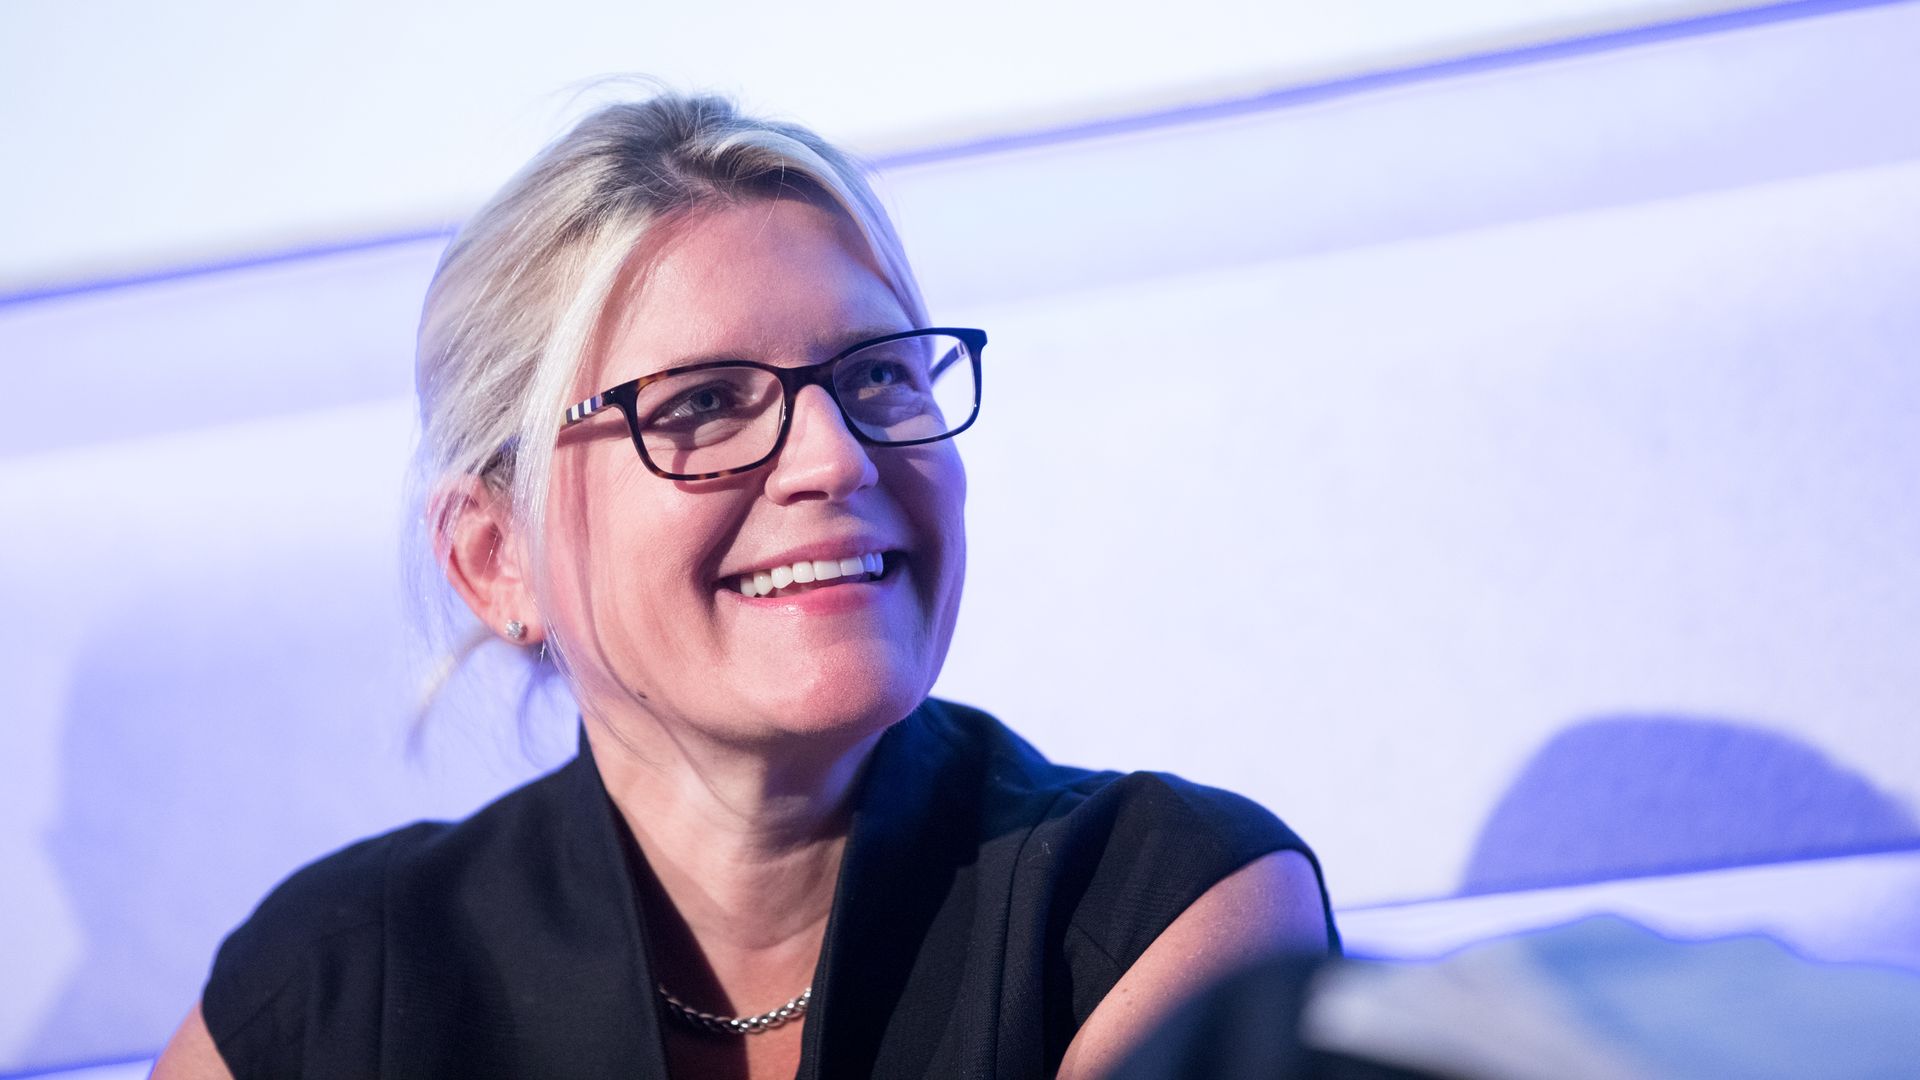 Joanna Geraghty, president and chief operating officer of JetBlue Airways Corp., speaks during a panel session at the World Aviation Festival in London, U.K., on Thursday, Sept. 5, 2019. 